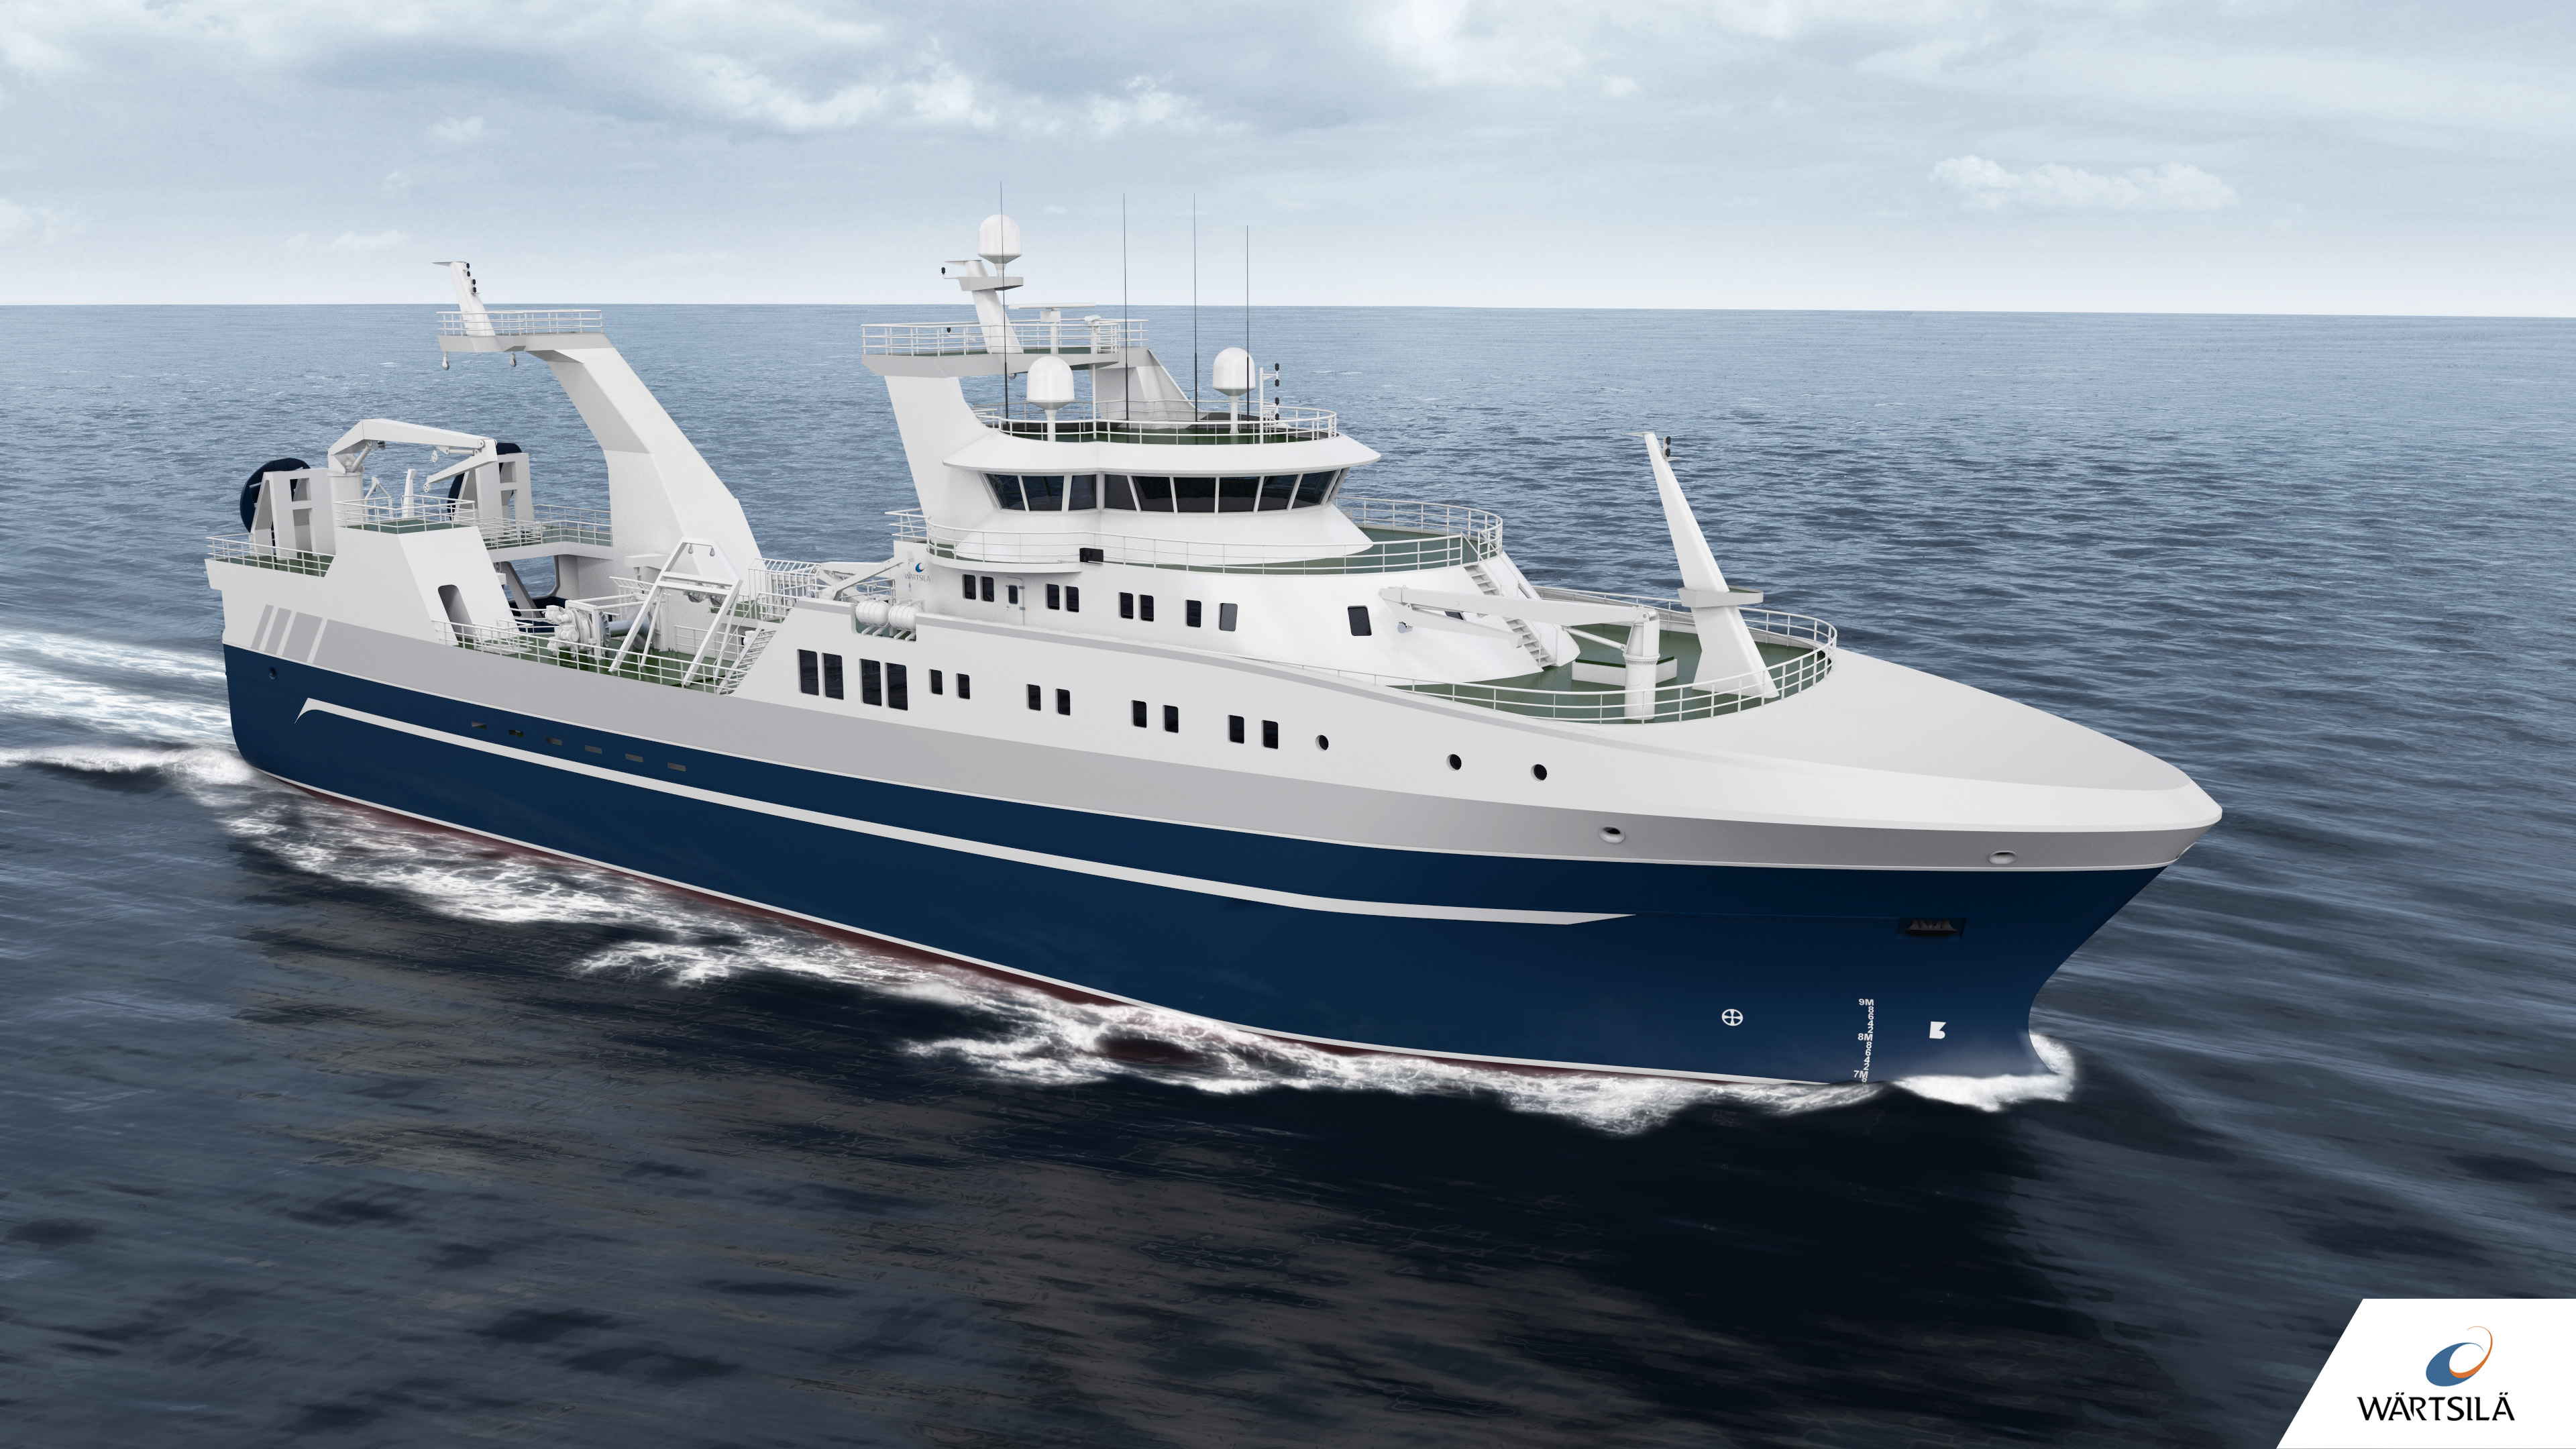 Caption: The new optimised stern trawler designed by Wärtsilä will reduce fuel consumption and notably increase overall vessel efficiency compared to currently available designs.